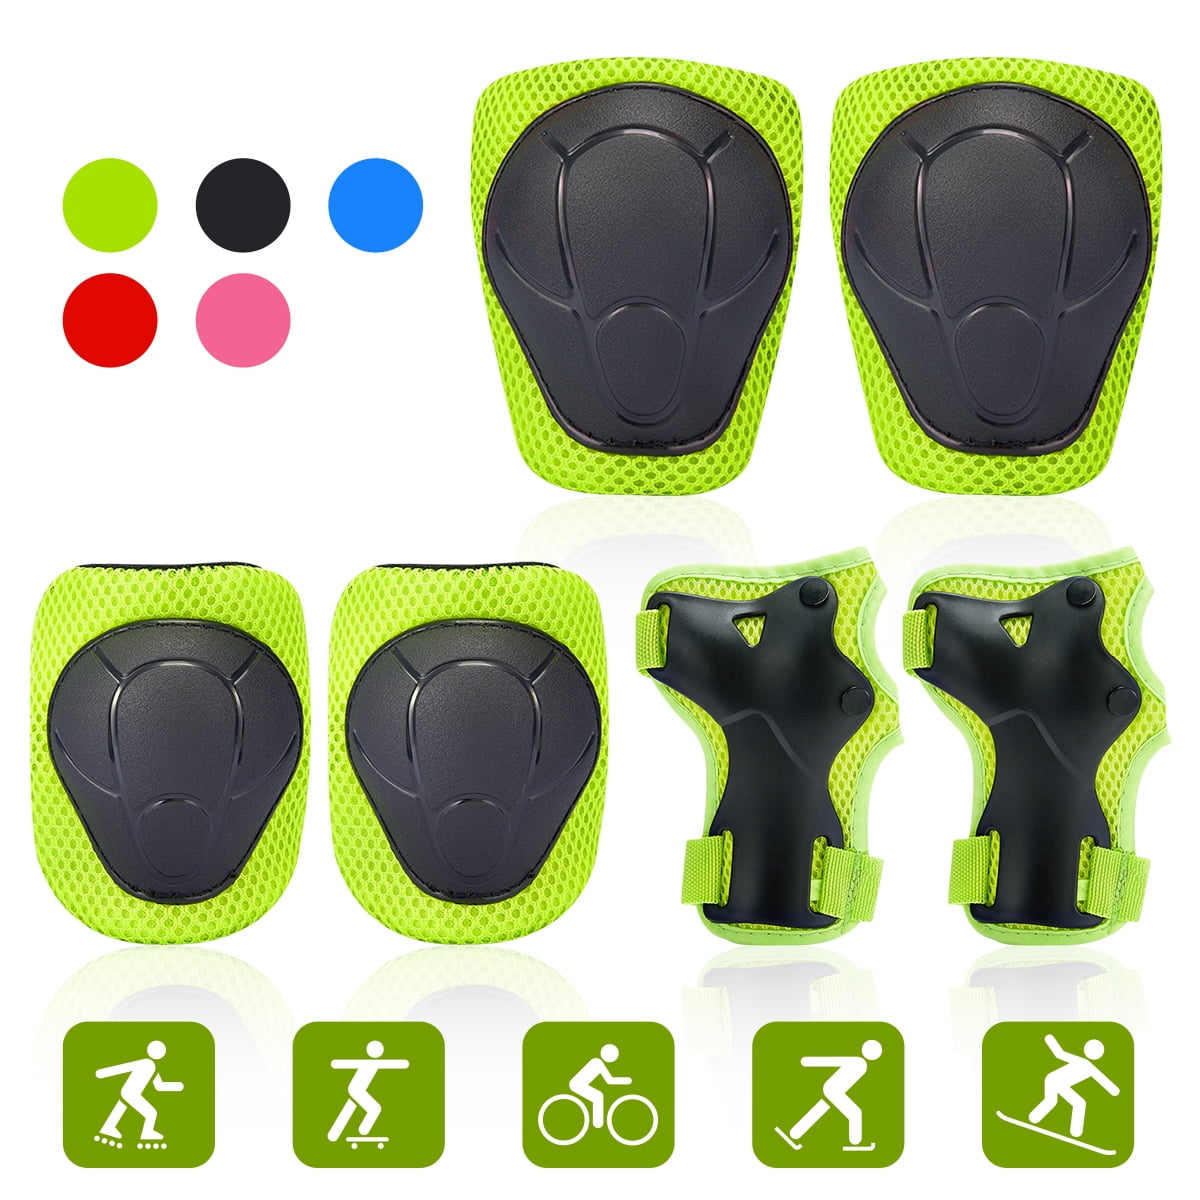 SKL Knee Pads 6 Pieces Kids Knee and Elbow Pads Wrist Guards for